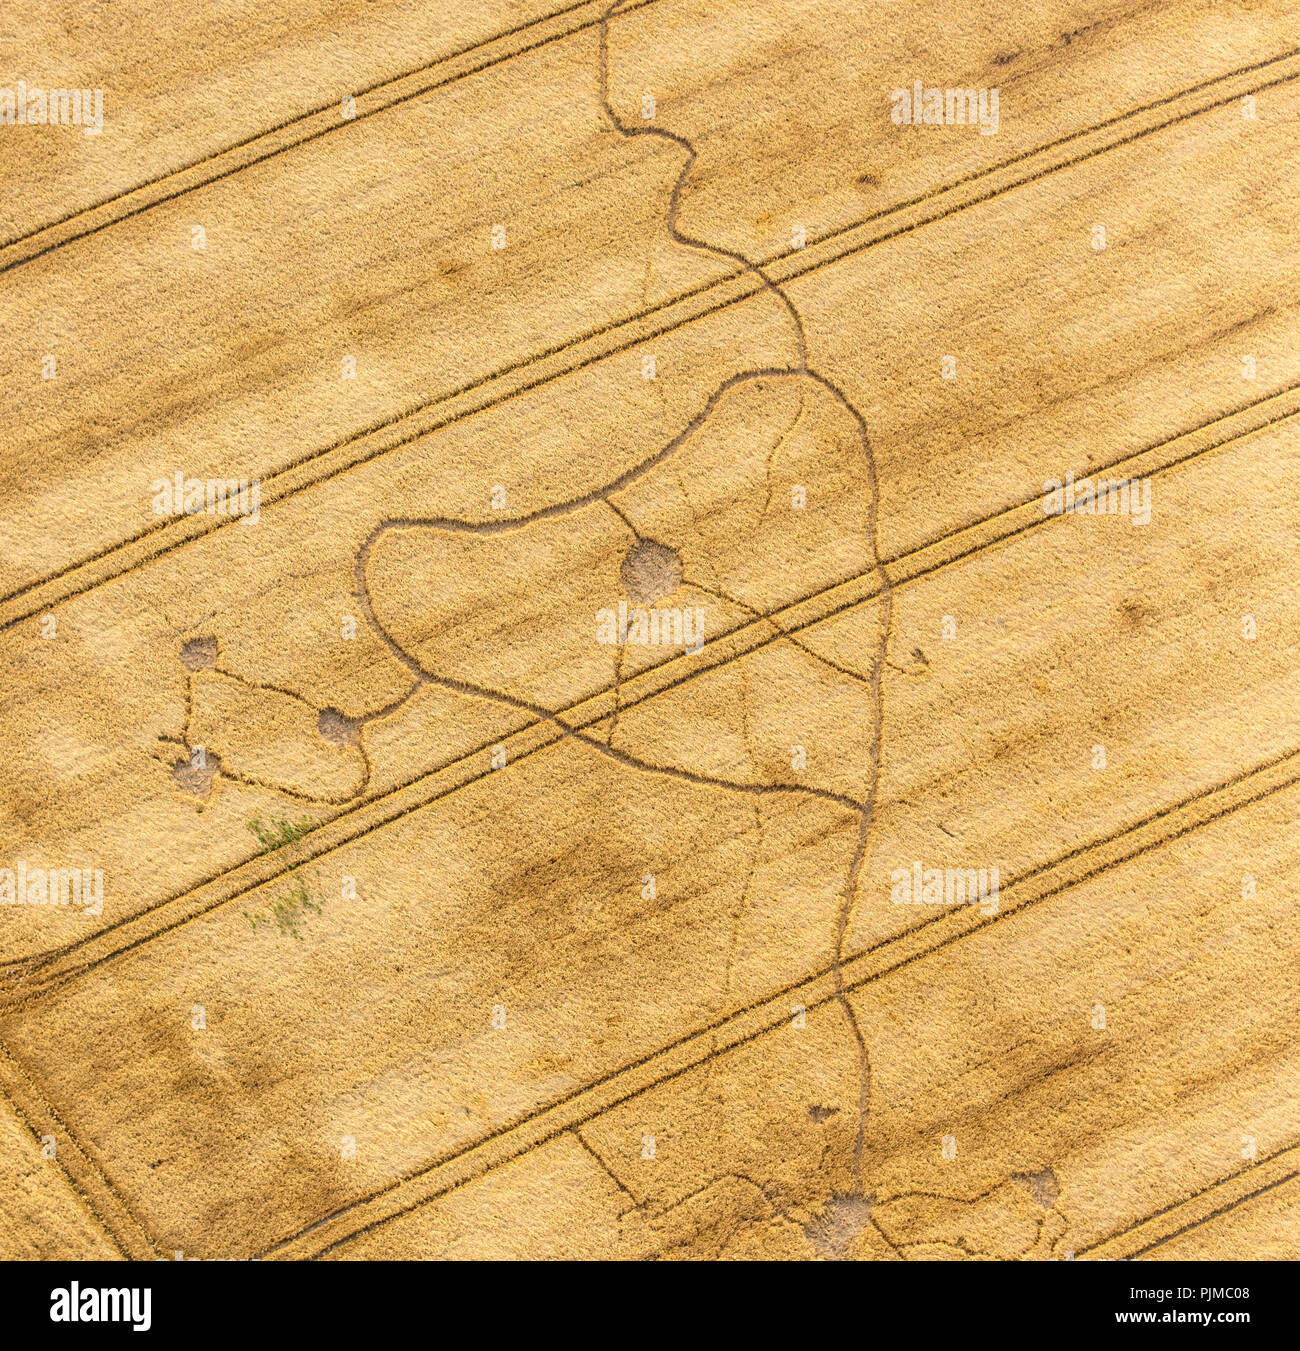 Cornfield with mole lines in the shape of a dog head, Sichtigvor, Warstein, district Soest, North Rhine-Westphalia, Germany Stock Photo